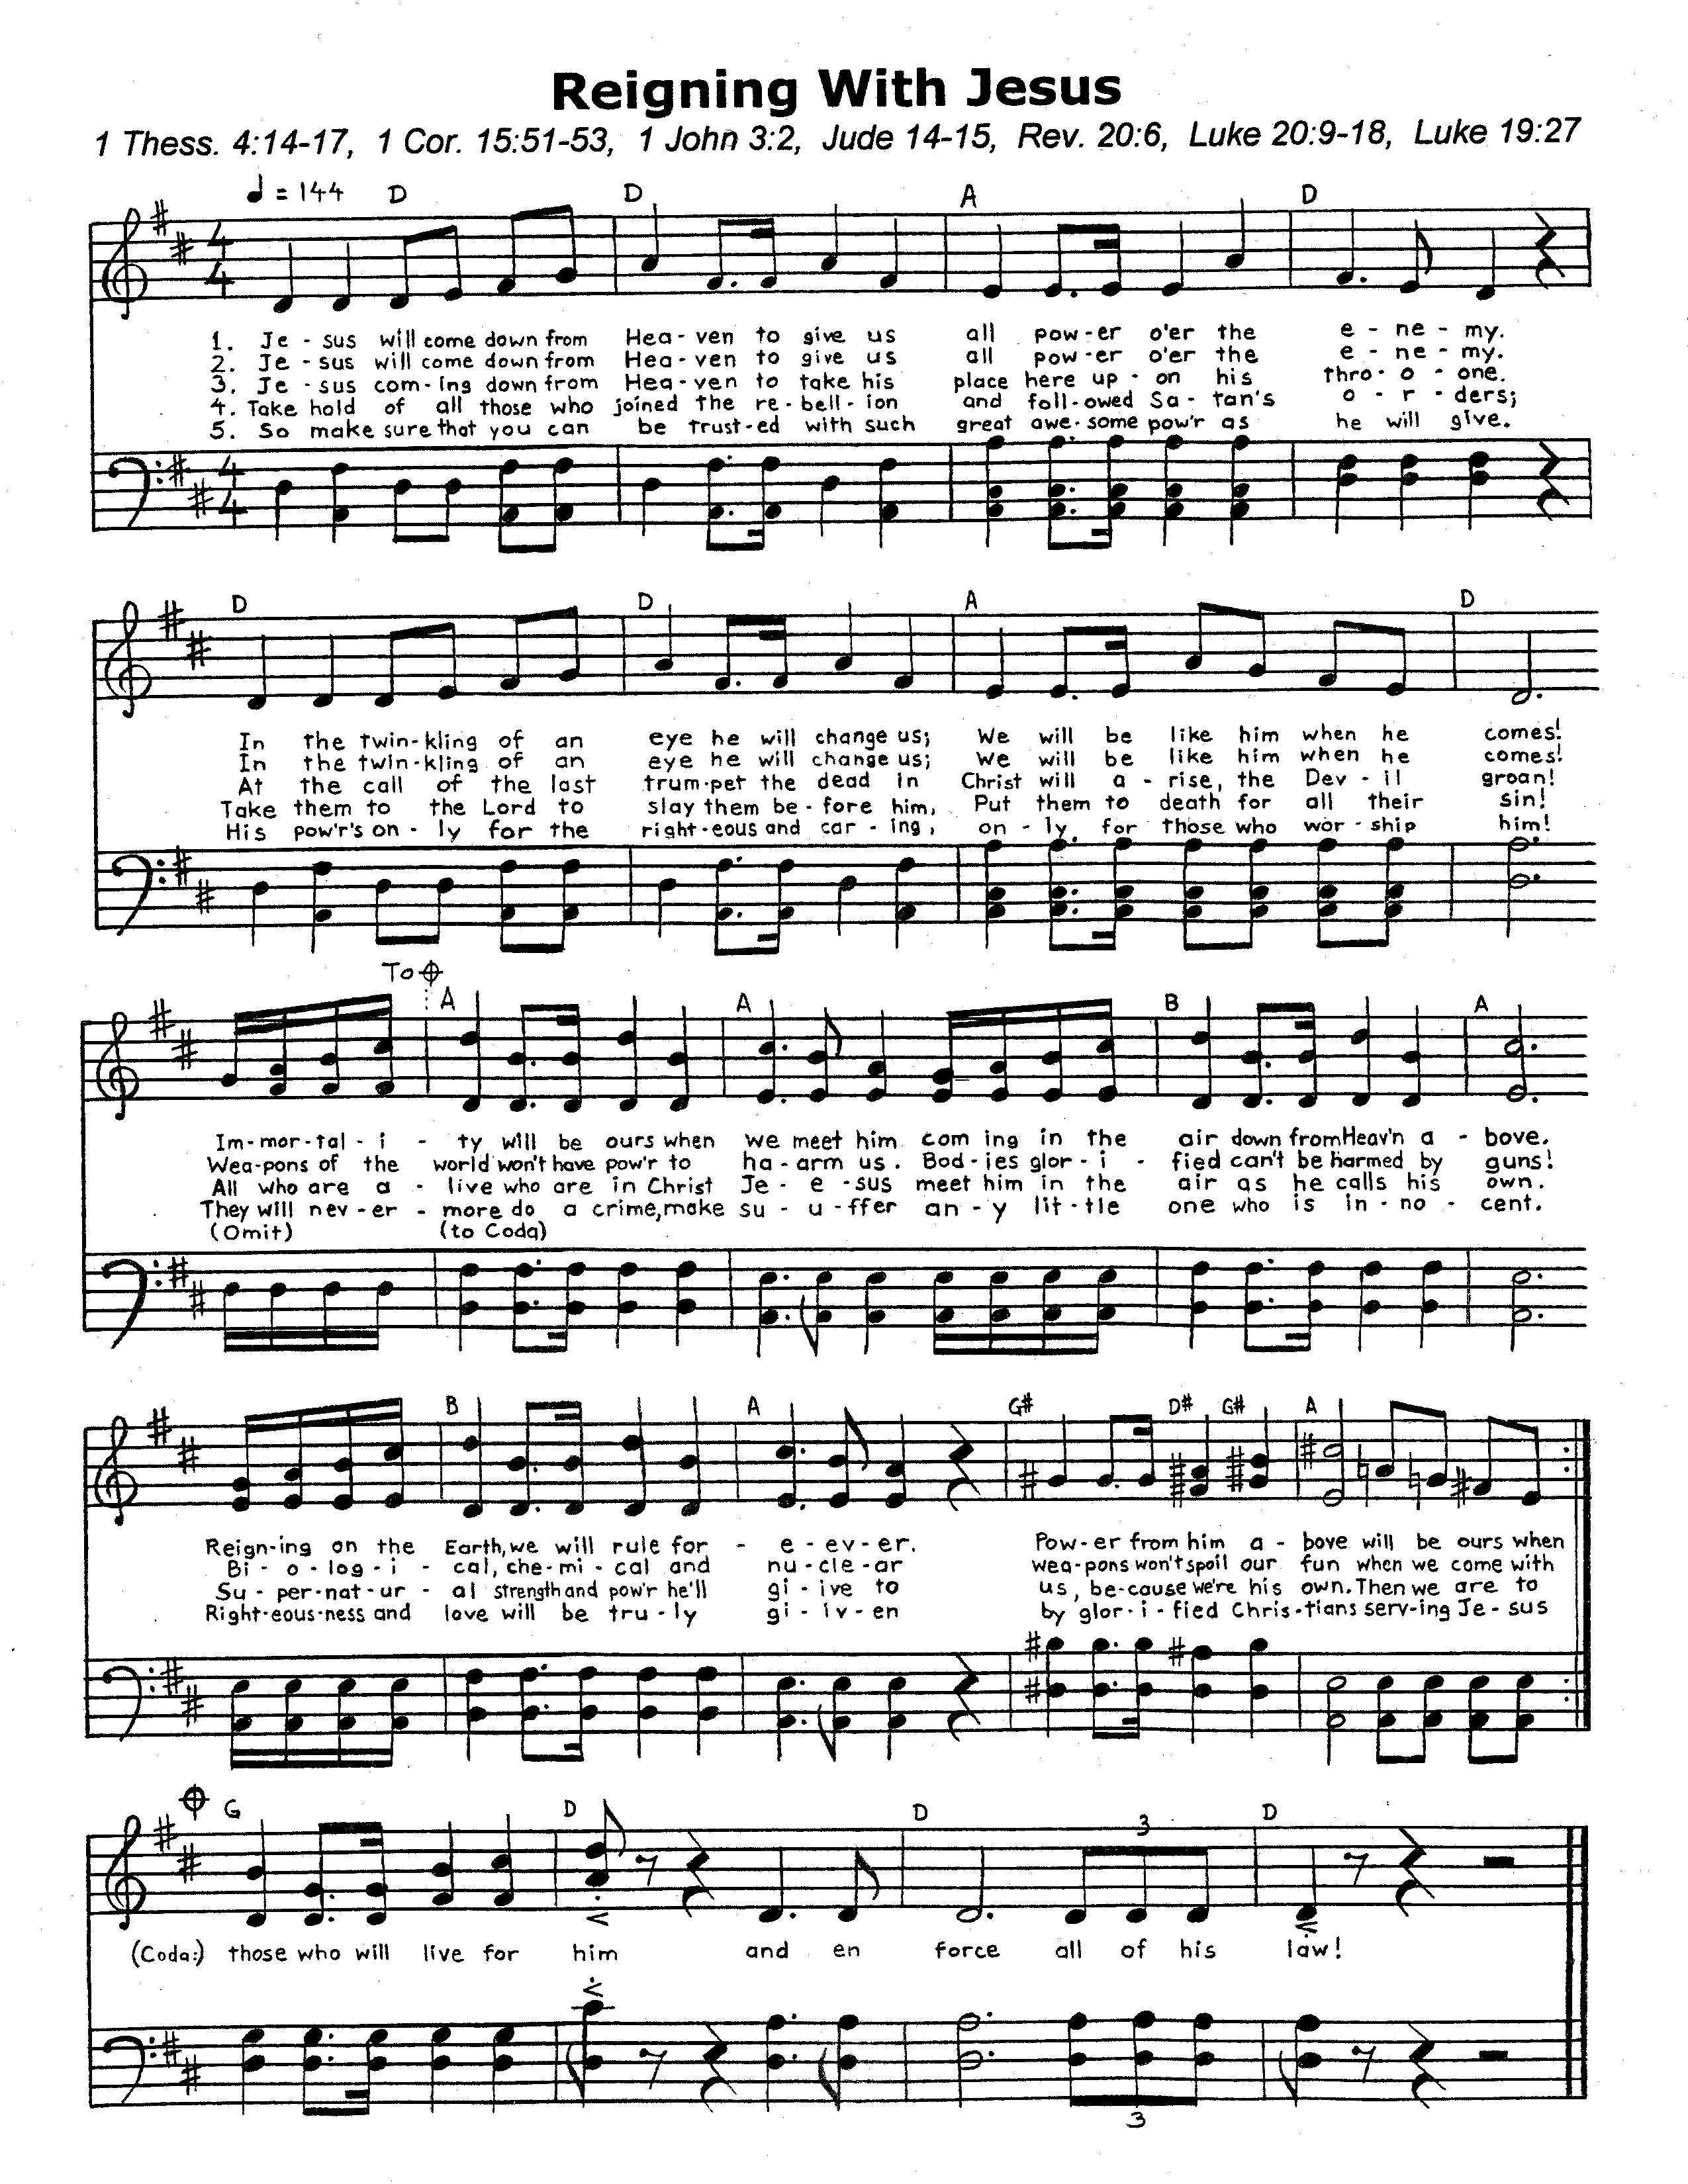 Reigning With Jesus - sheet music